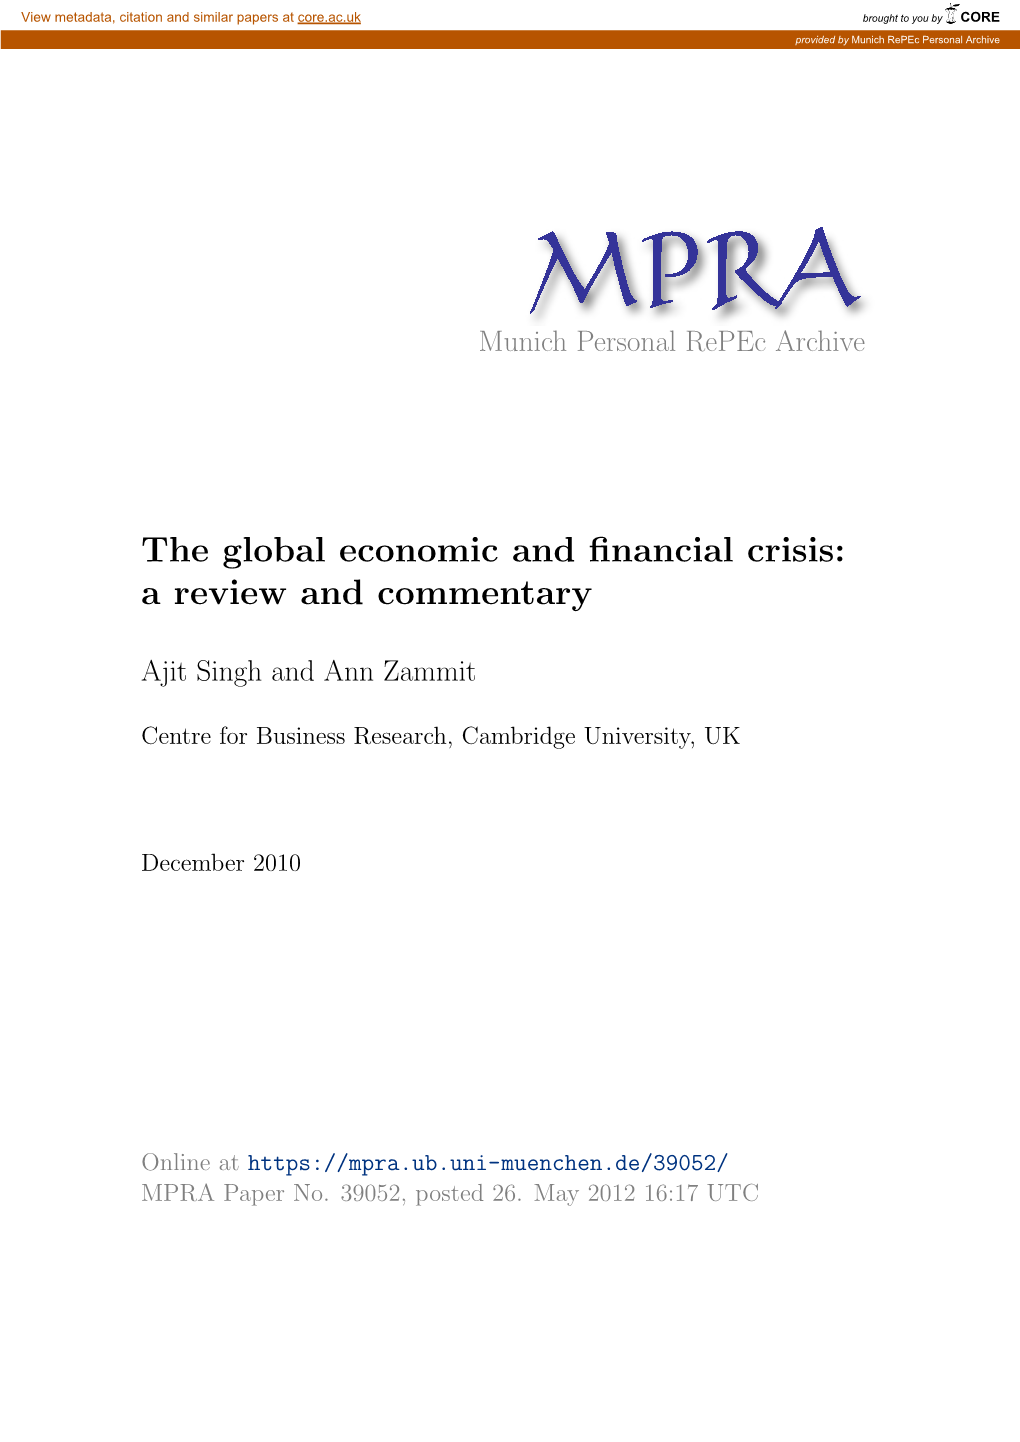 The Global Economic and Financial Crisis a Review and Commentary